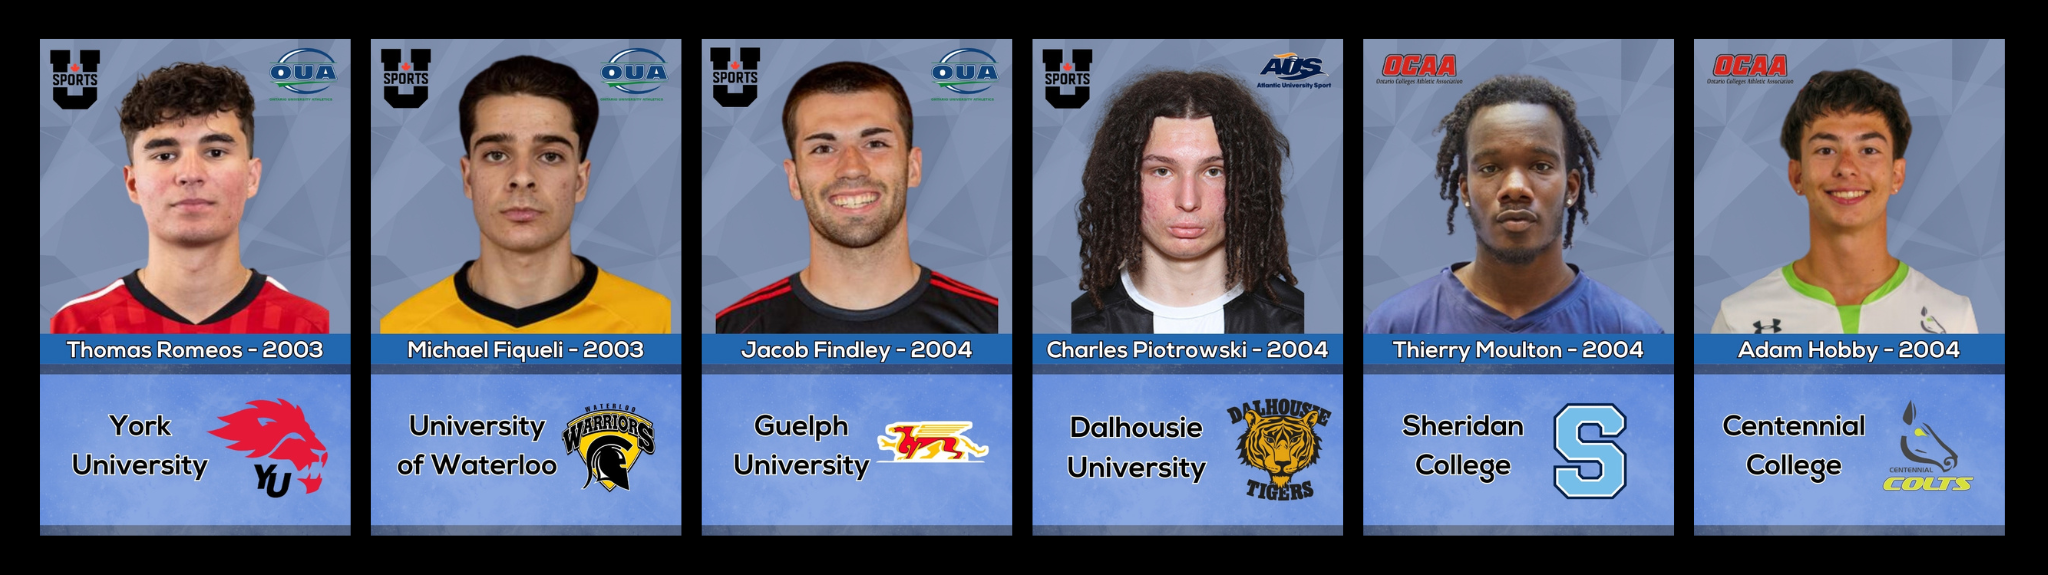 2003 and 2004 Uni Soccer Image 4